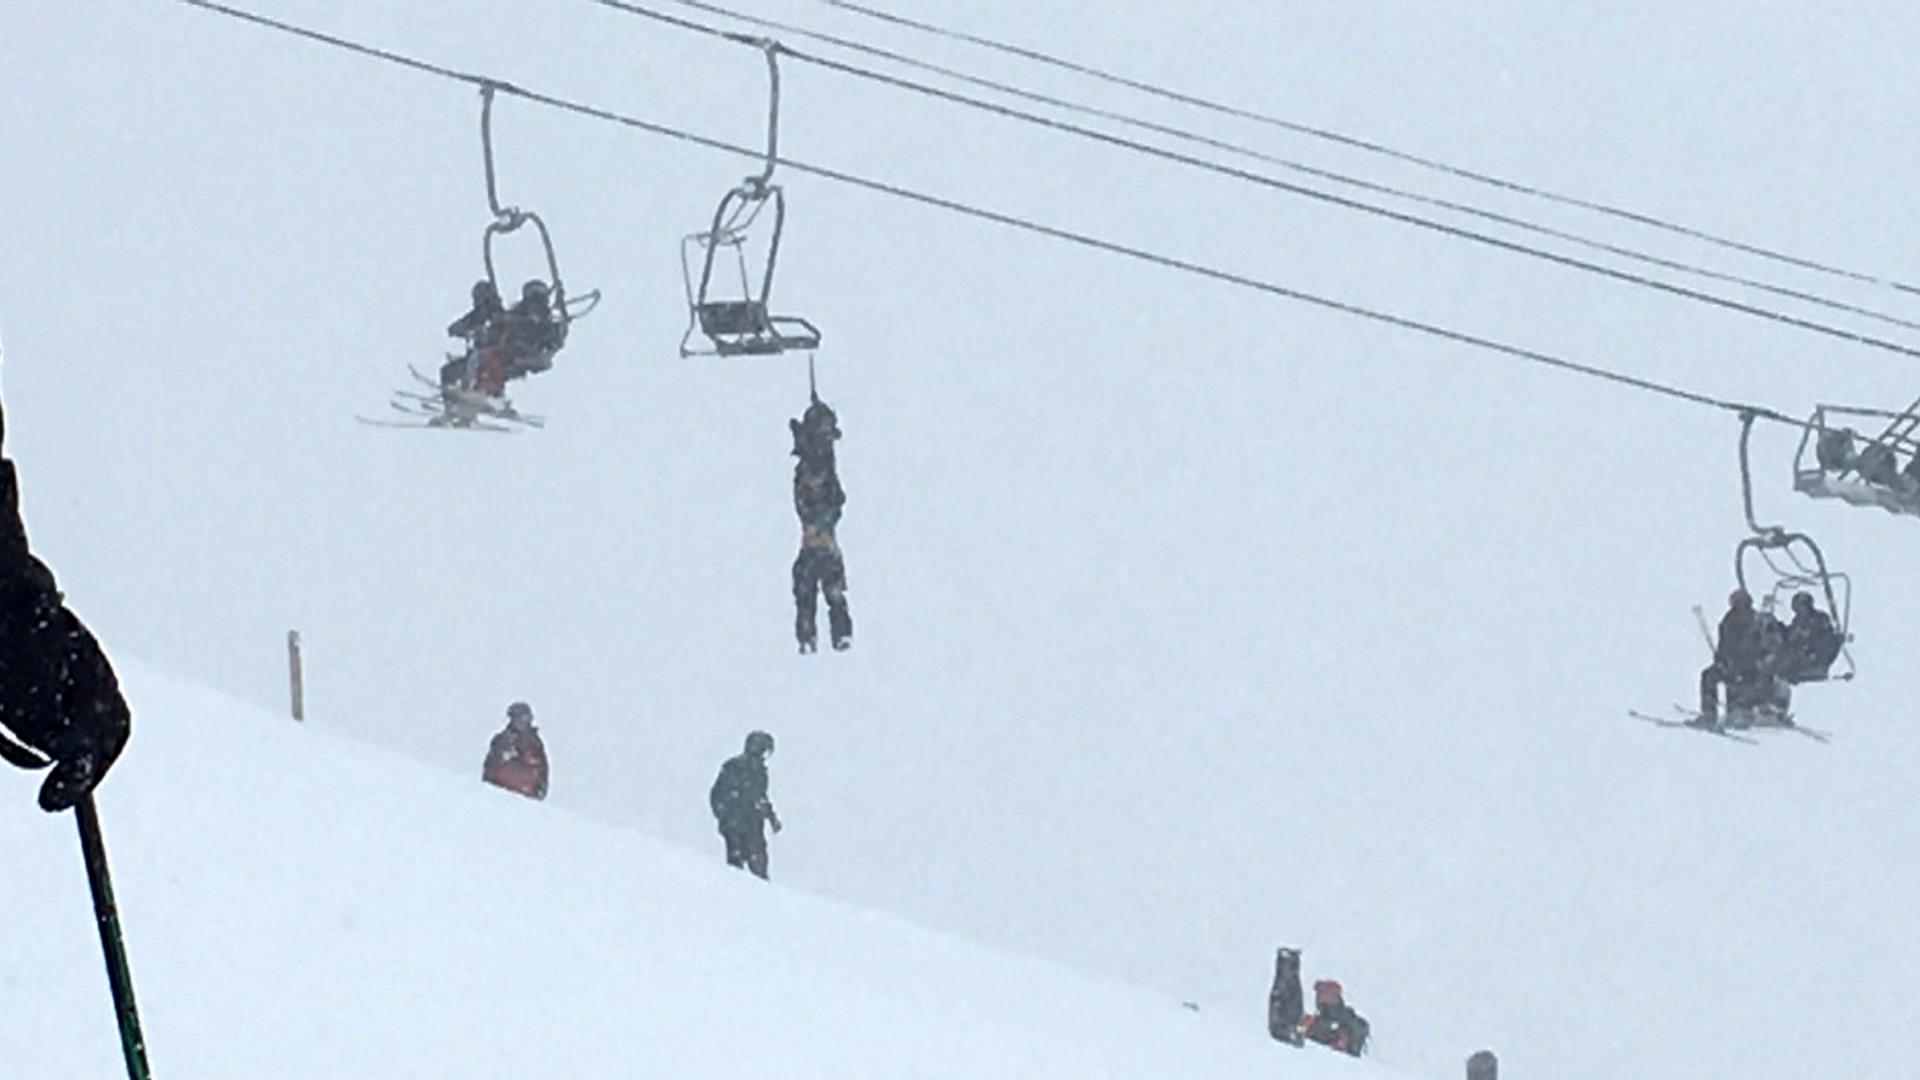 Man dangling unconscious from ski lift rescued by daring slackliner